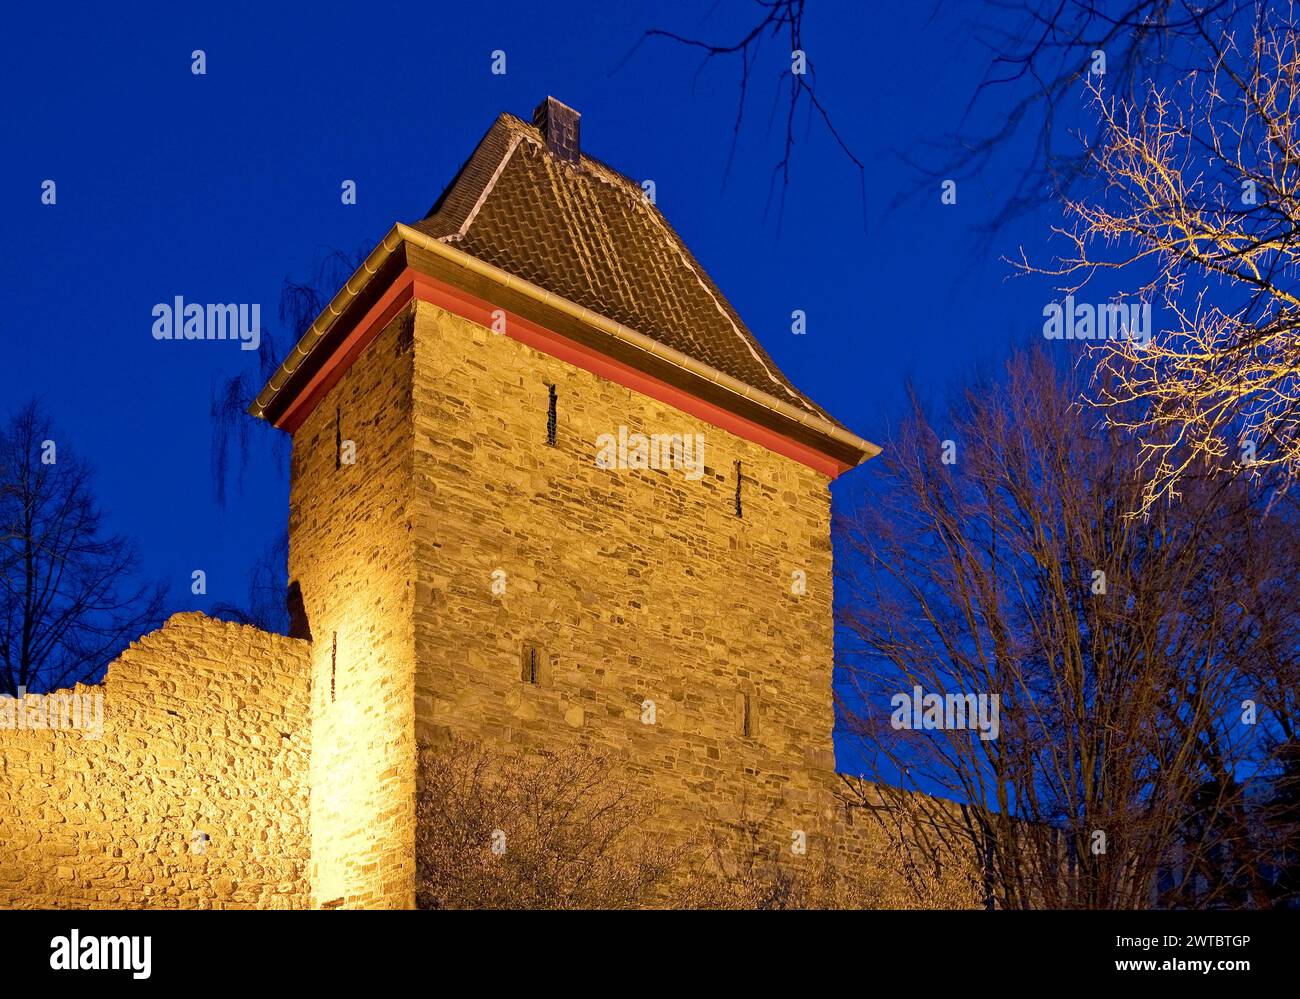 Illuminated Trinsen Tower in the evening, Old Town, Ratingen, Bergisches Land, North Rhine-Westphalia, Germany Stock Photo